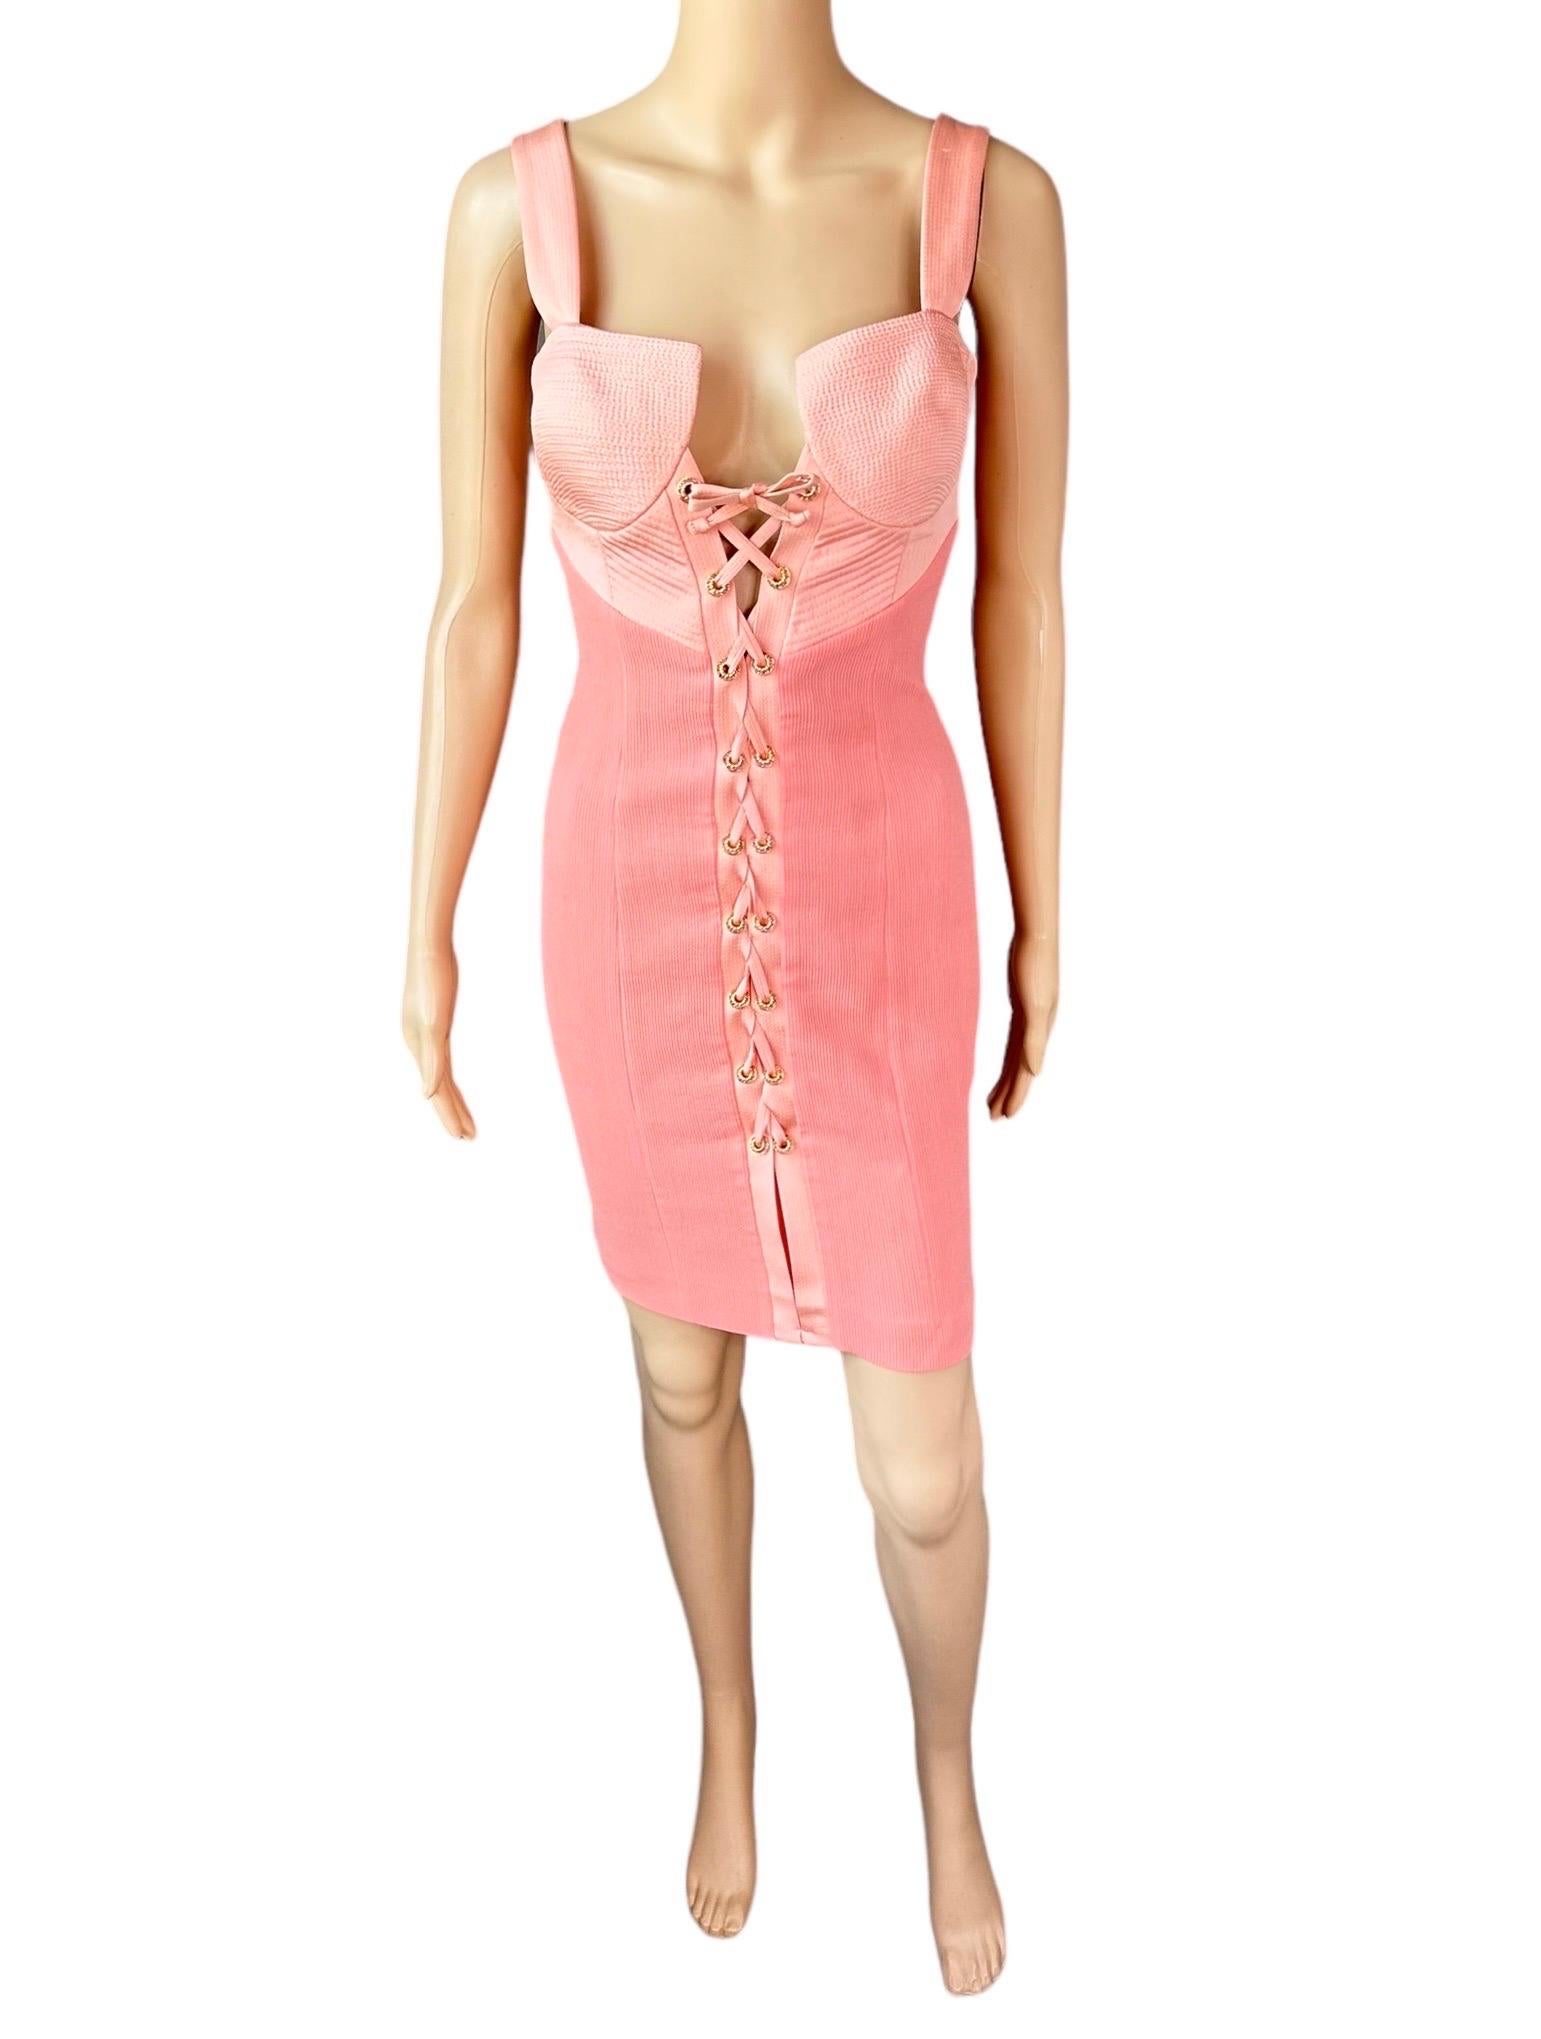 Gianni Versace S/S 1992 Couture Bustier Corset Lace Up Mini Dress For Sale 1